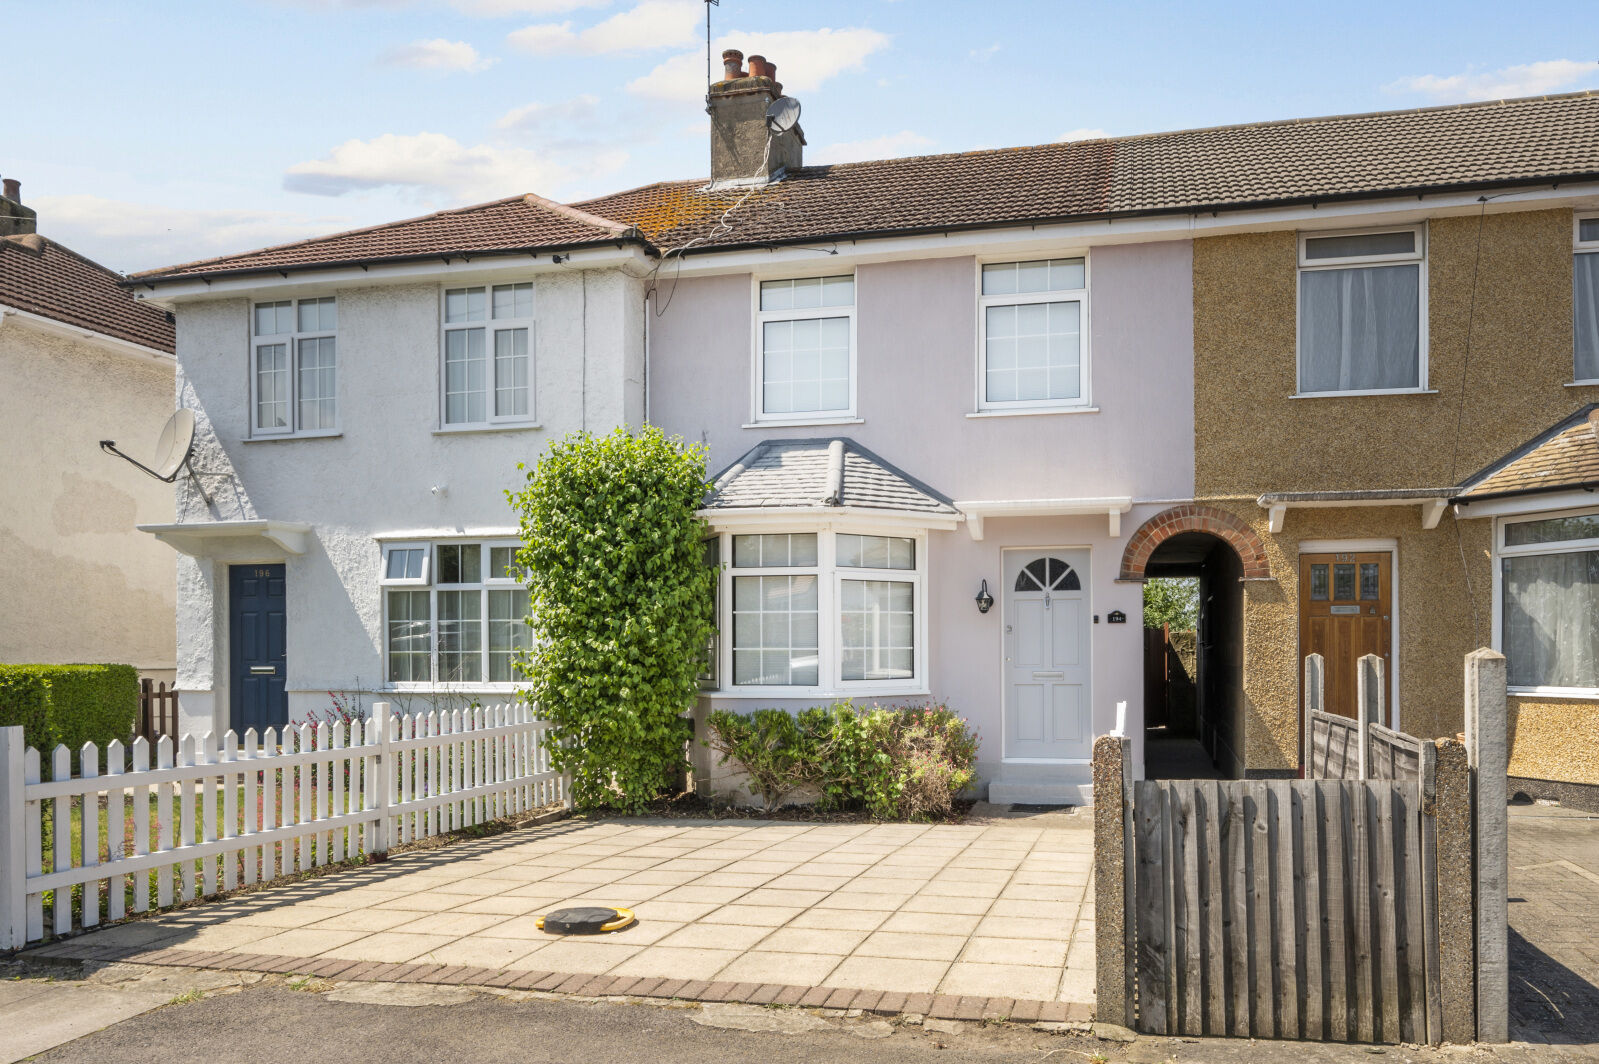 3 bedroom semi detached house for sale Cannon Hill Lane, London, SW20, main image